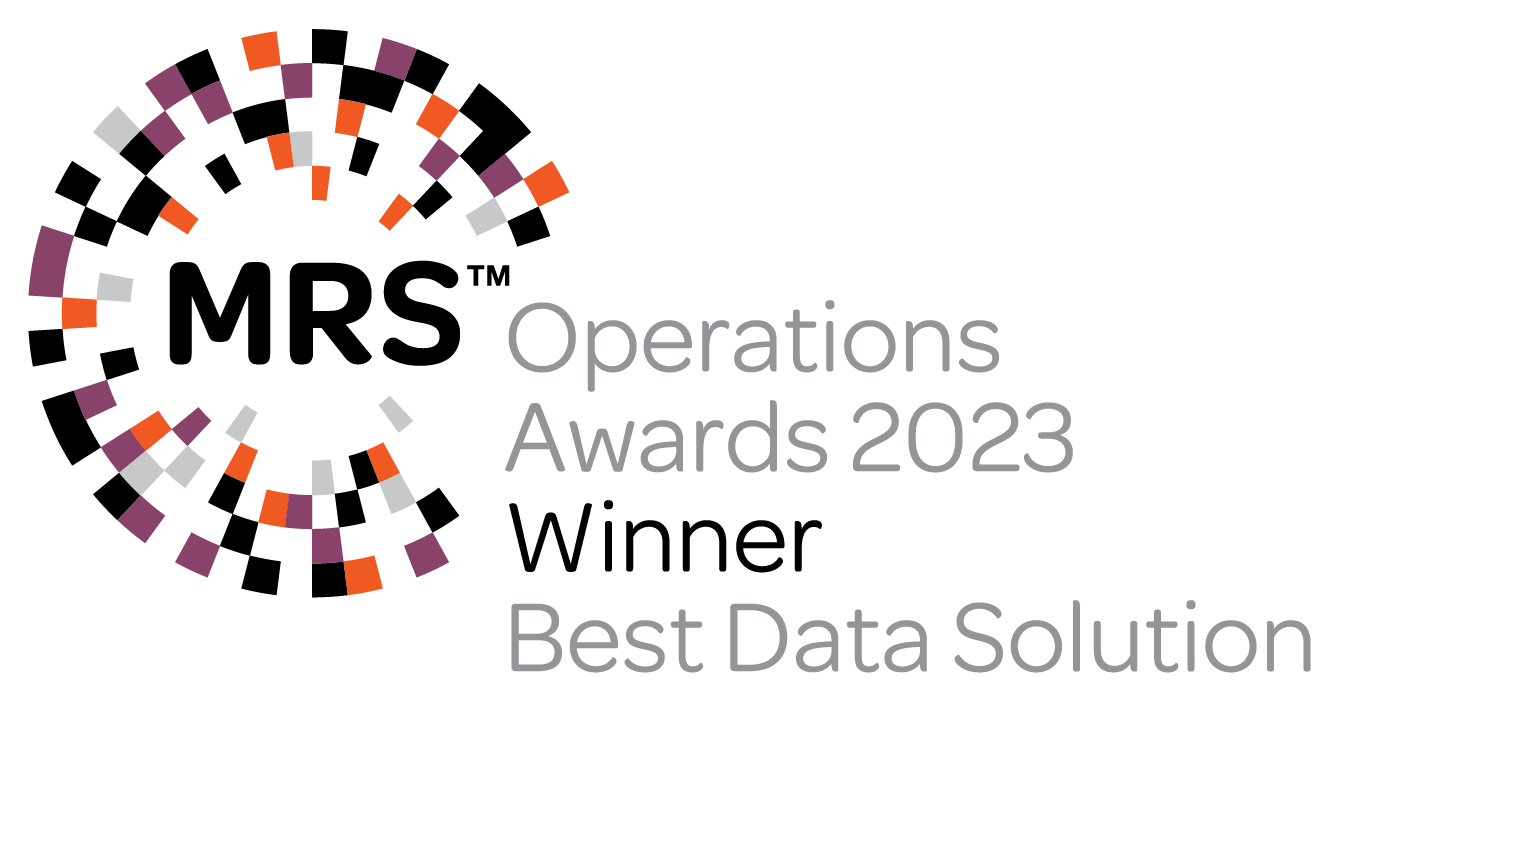 Market Research Society (MRS) Operations Award - Best Data Solution 2023